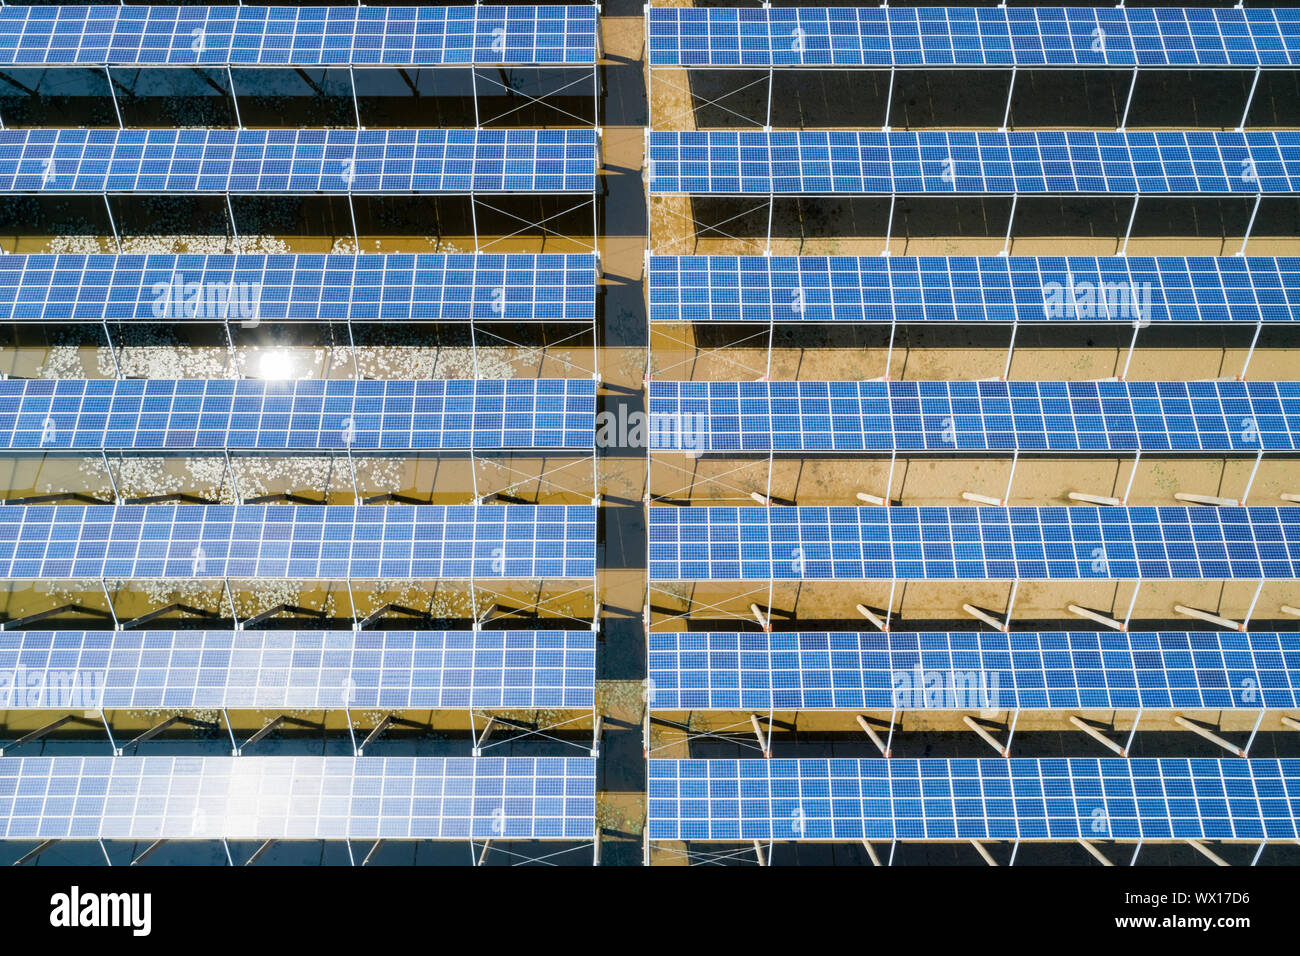 aerial view of solar power panels Stock Photo